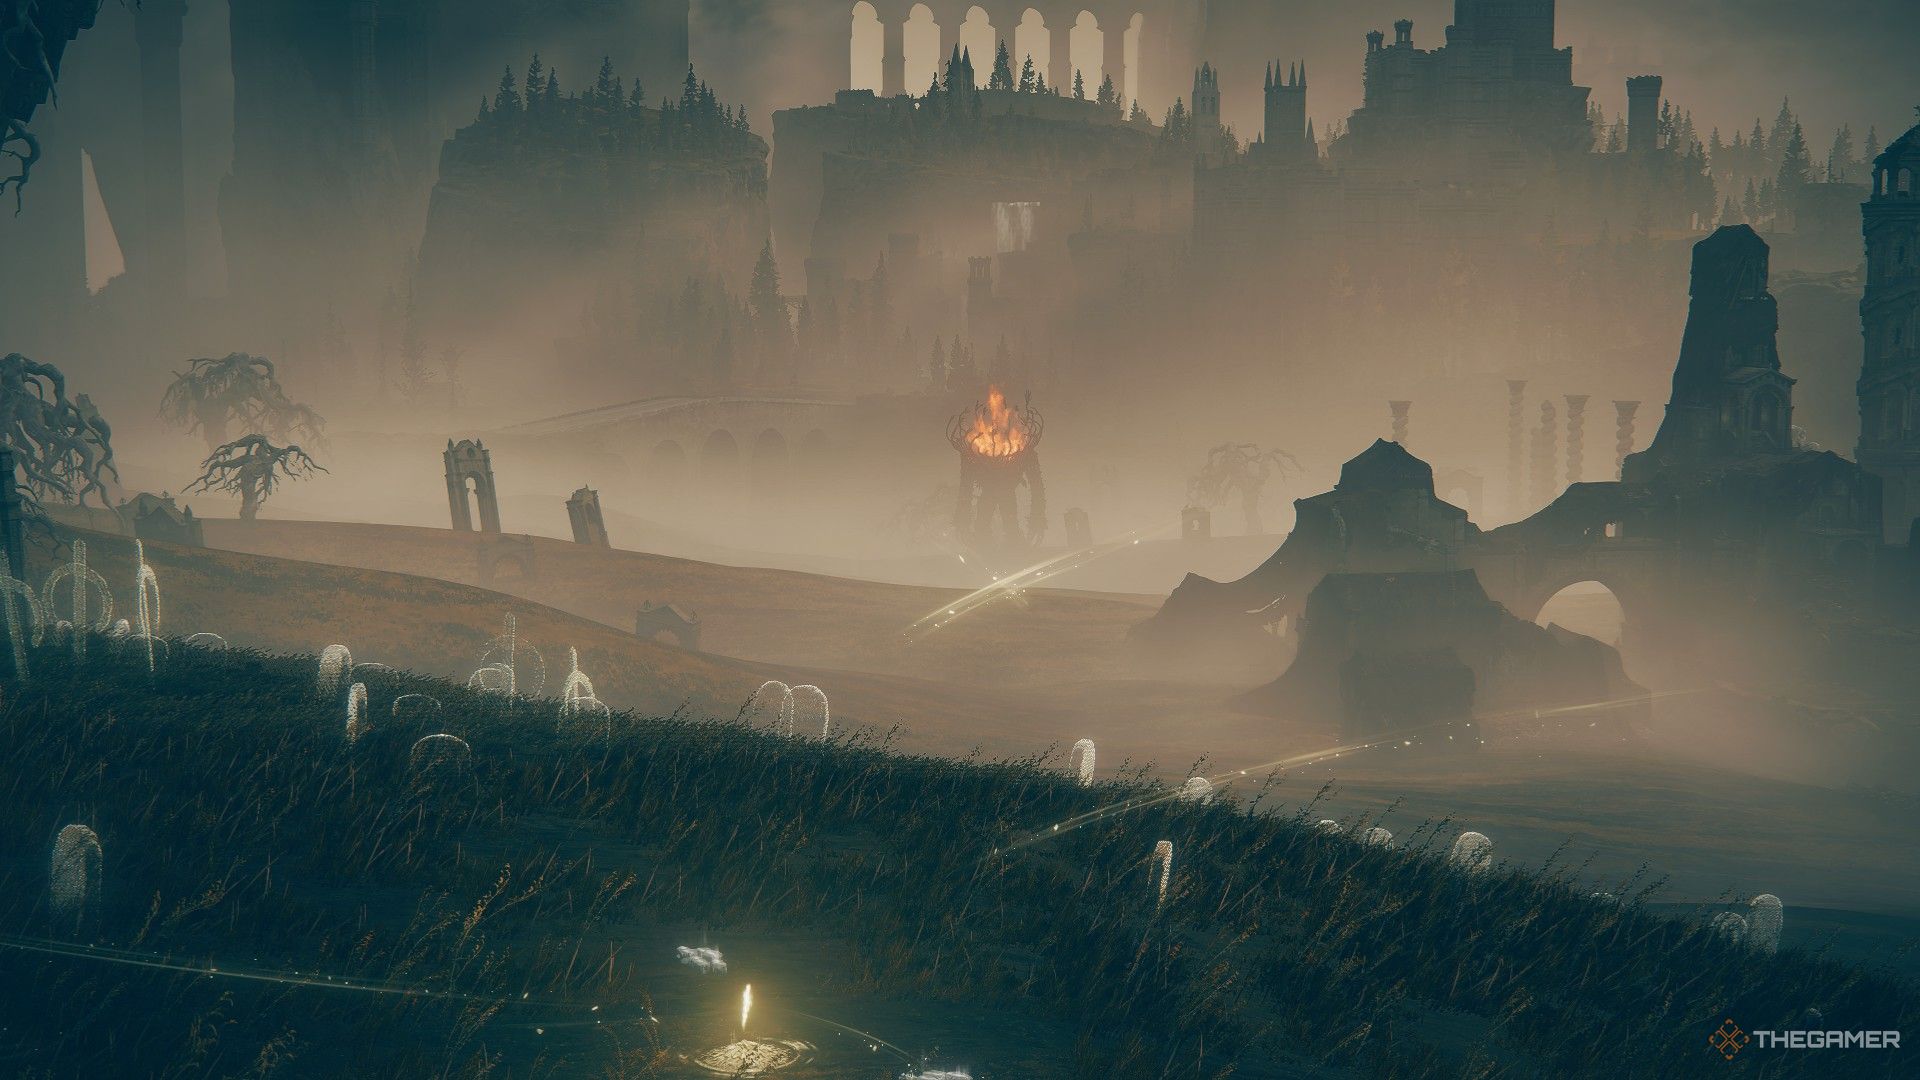 Player looks over the Gravesite Plain to spy the Furnace Golem at the Scorched Ruins in the distance in Elden Ring: Shadow of the Erdtree.